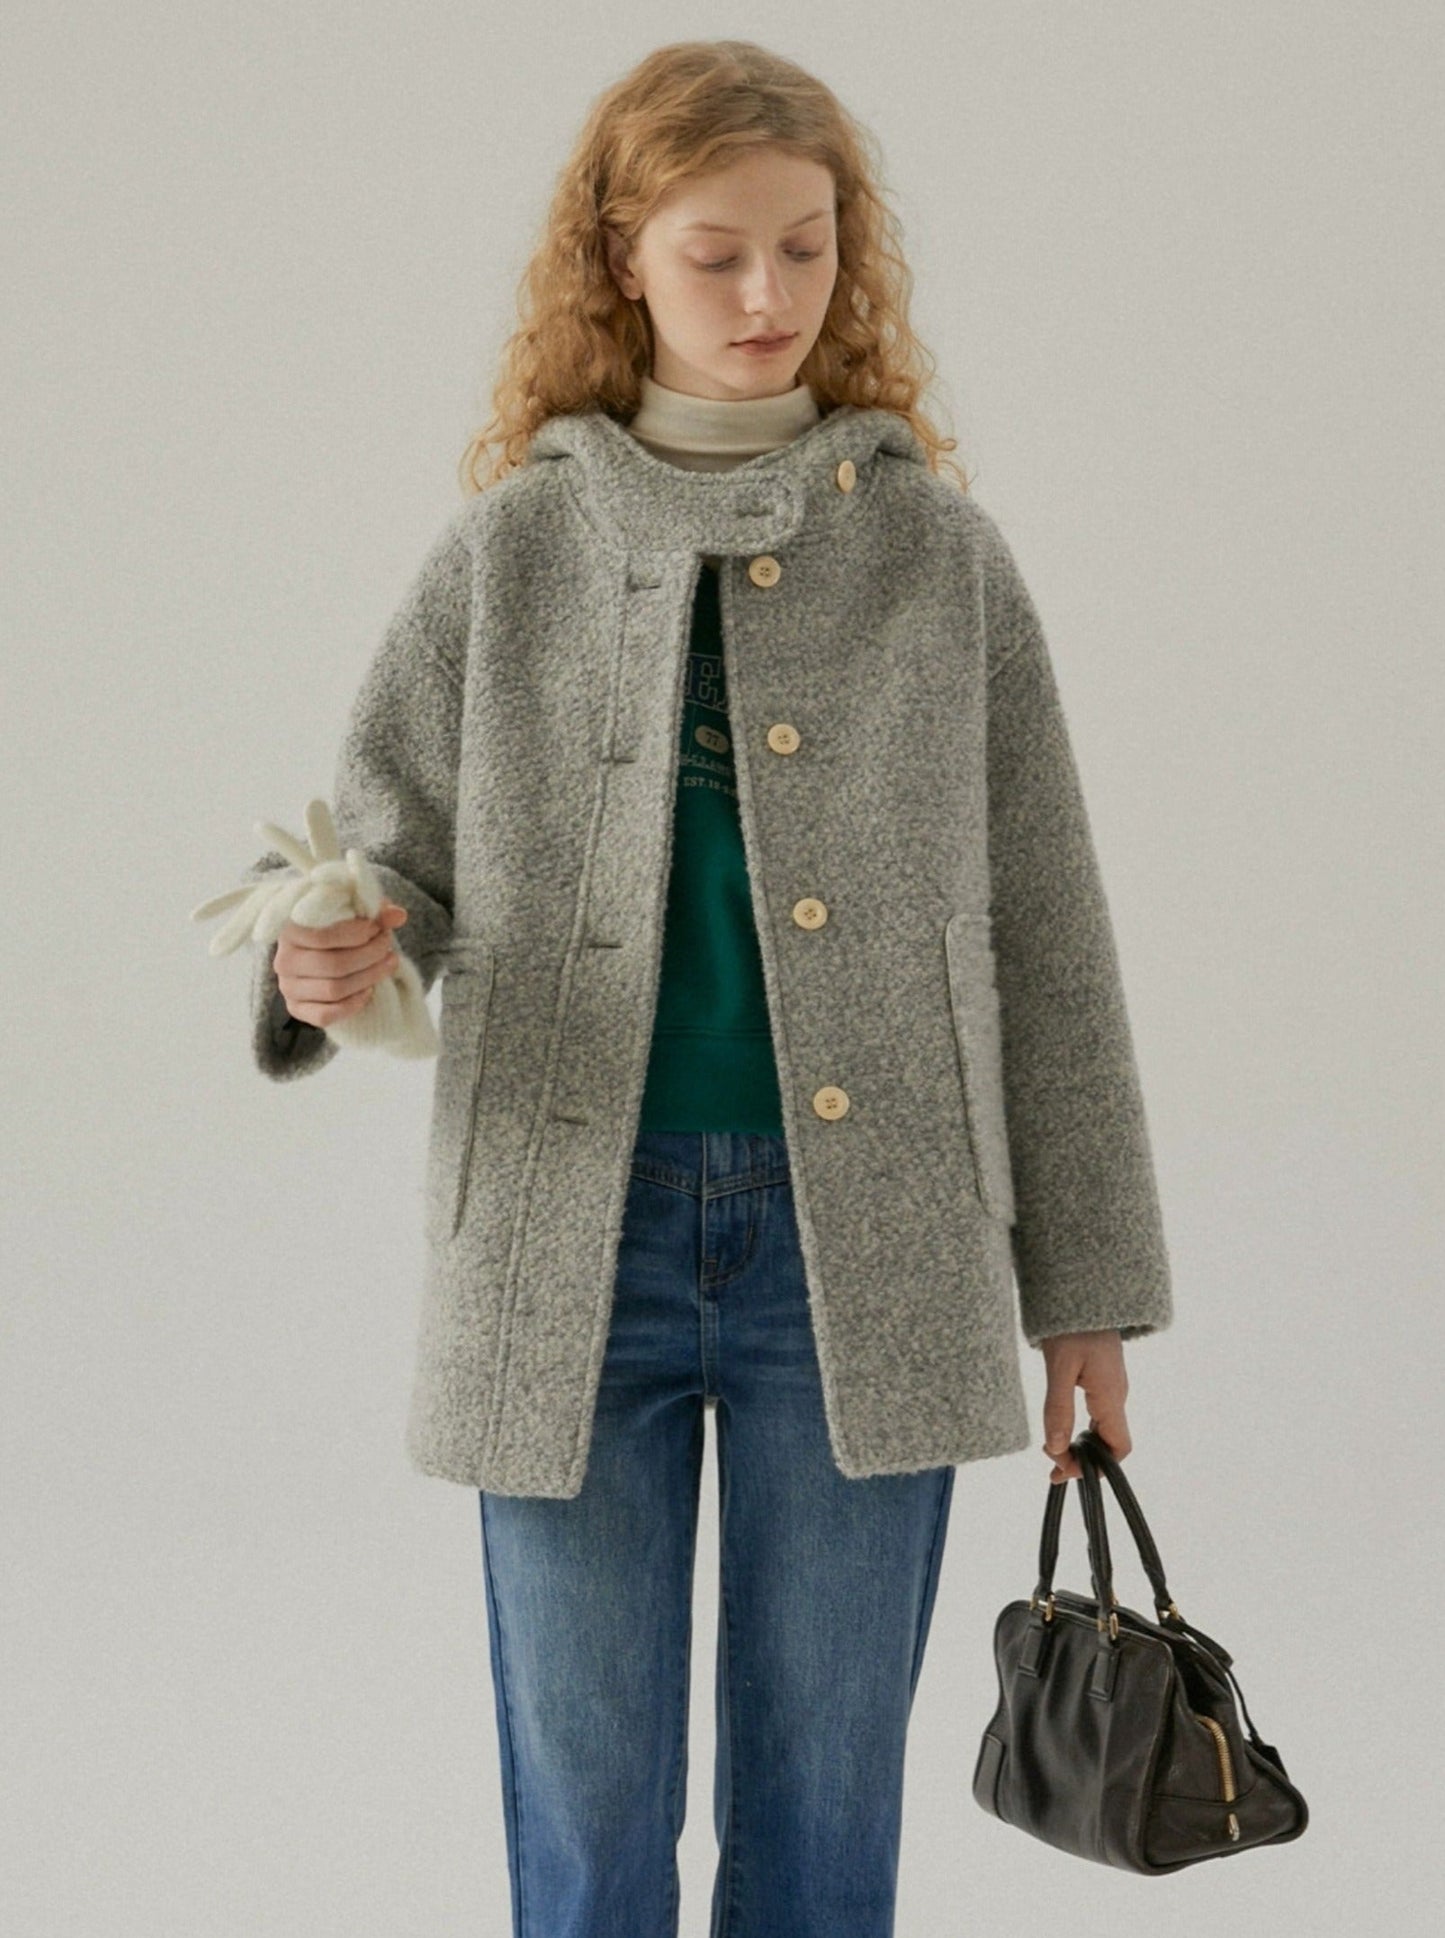 VINTAGE WOOL SMALL WEARING THICK COAT